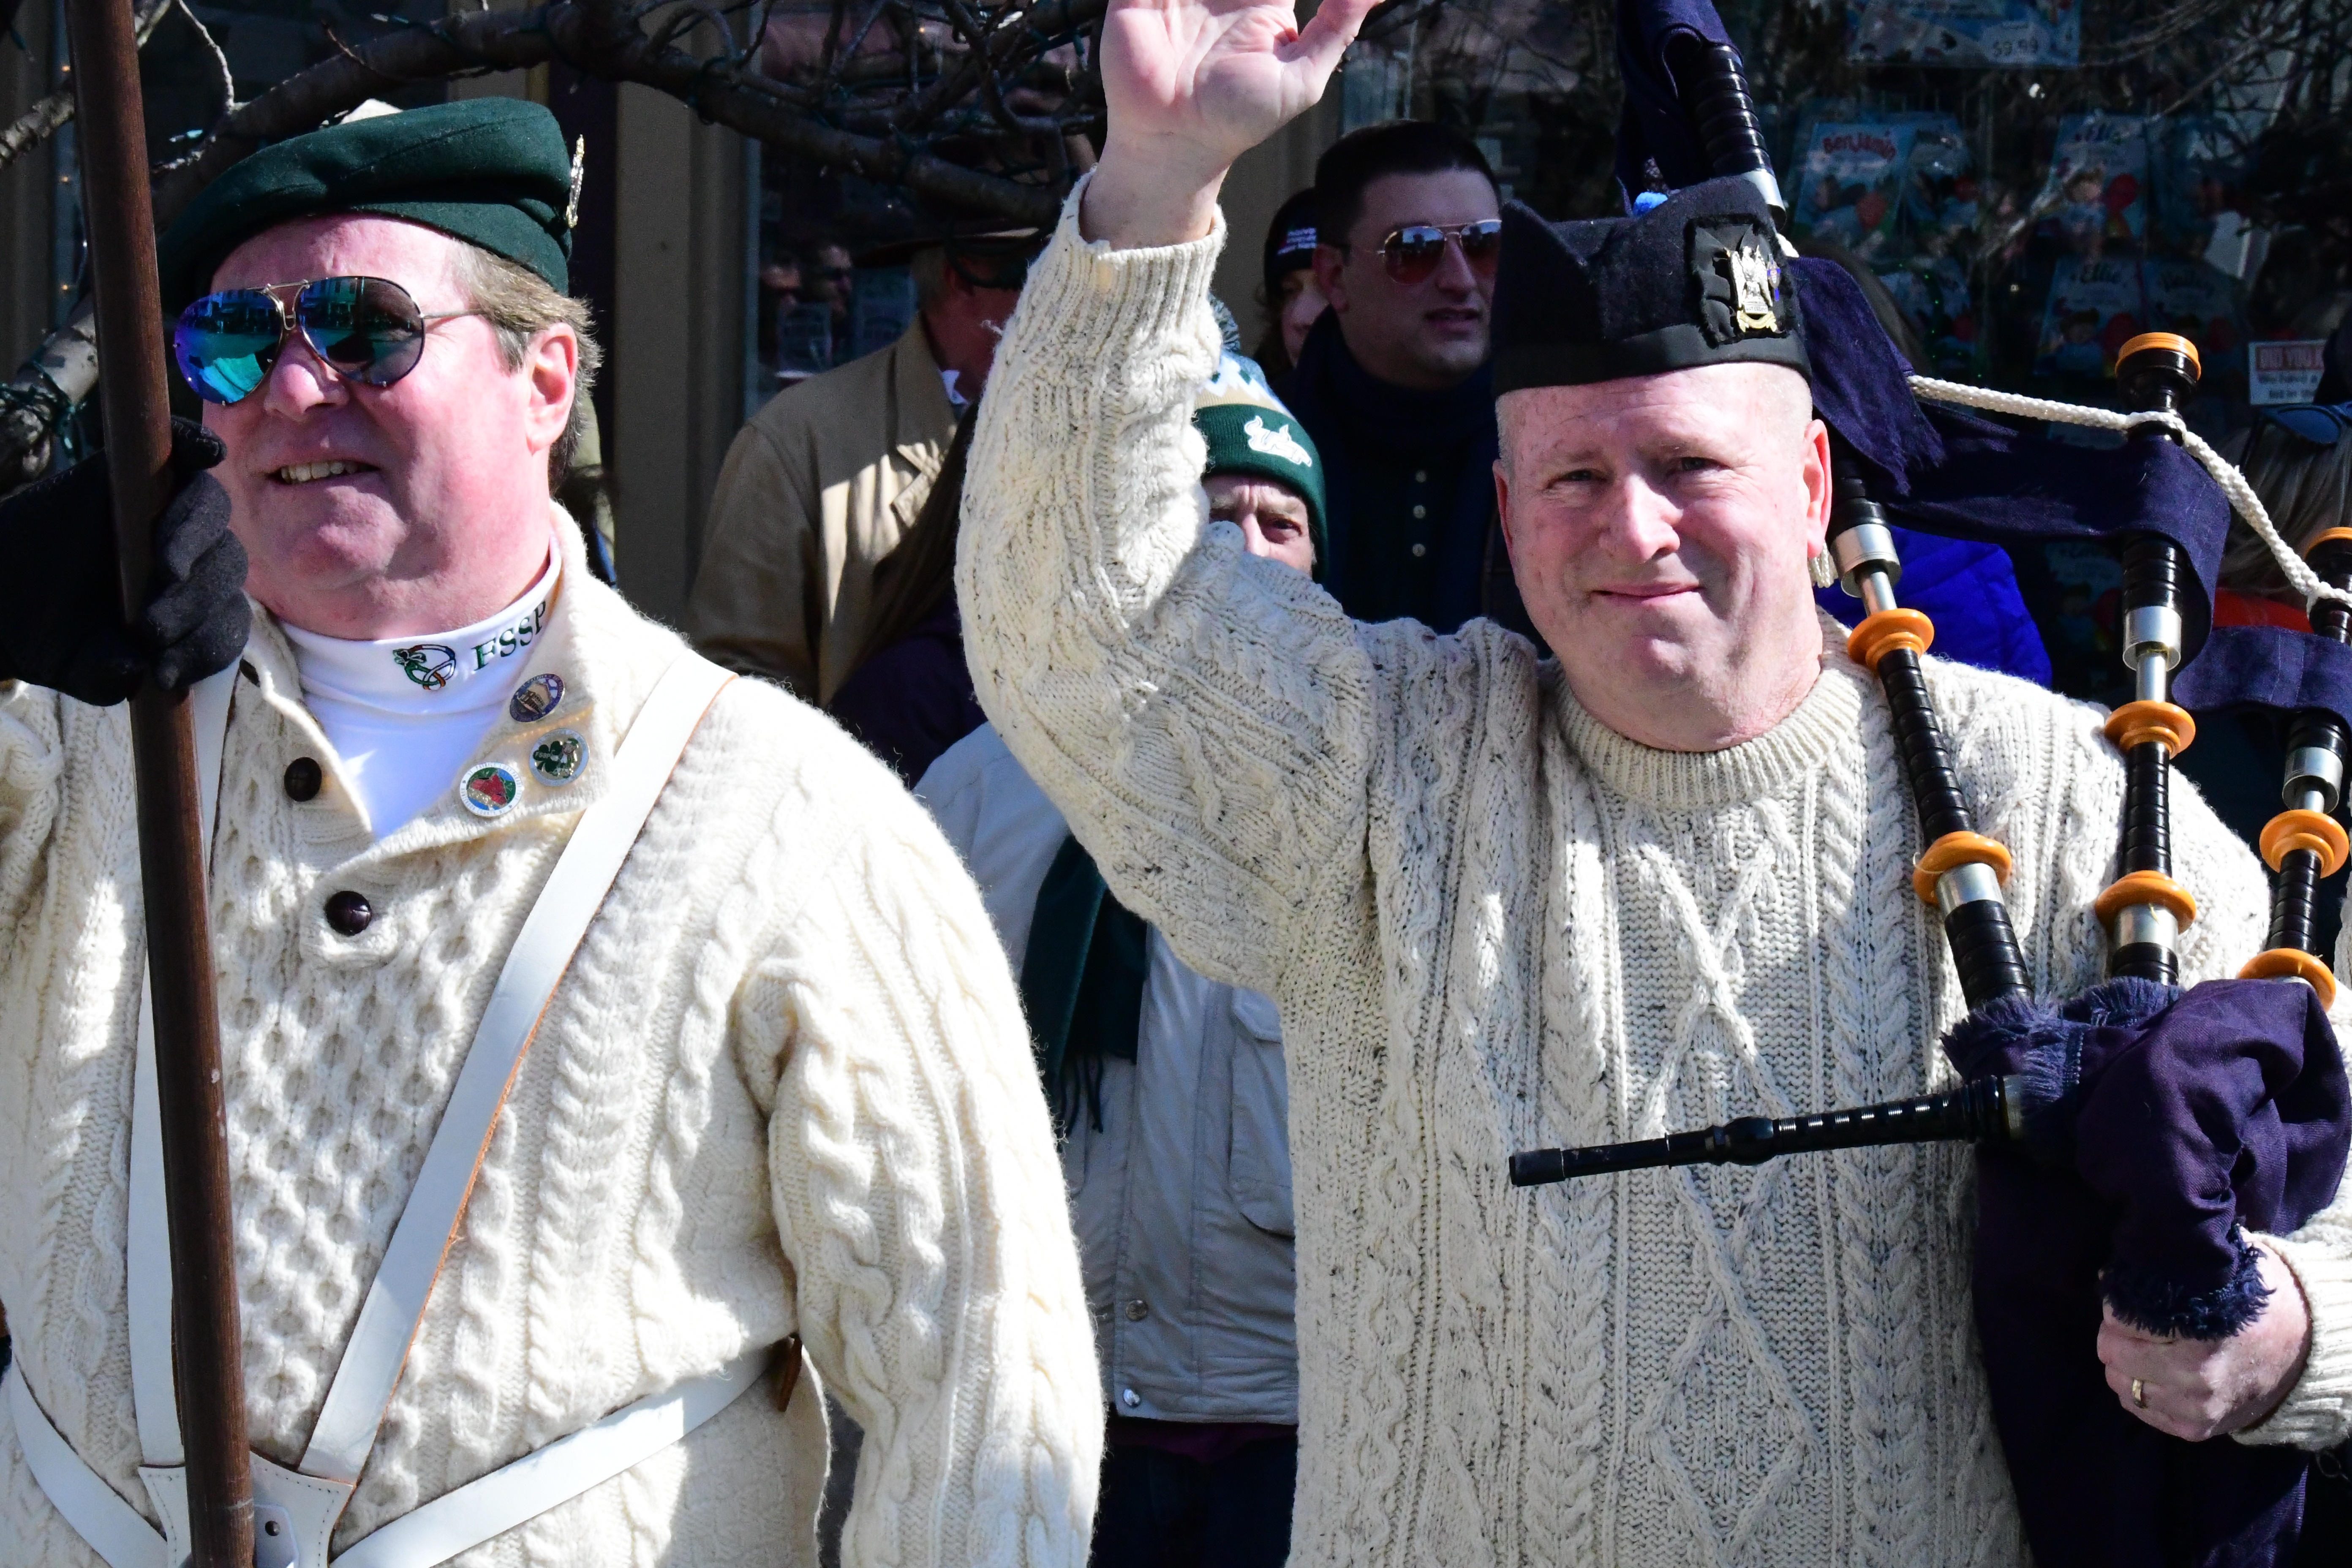 The 2022 St Patrick's Day Parade hosted by the Friendly Sons of St Patrick Hunterdon County took place in Clinton on March 13.